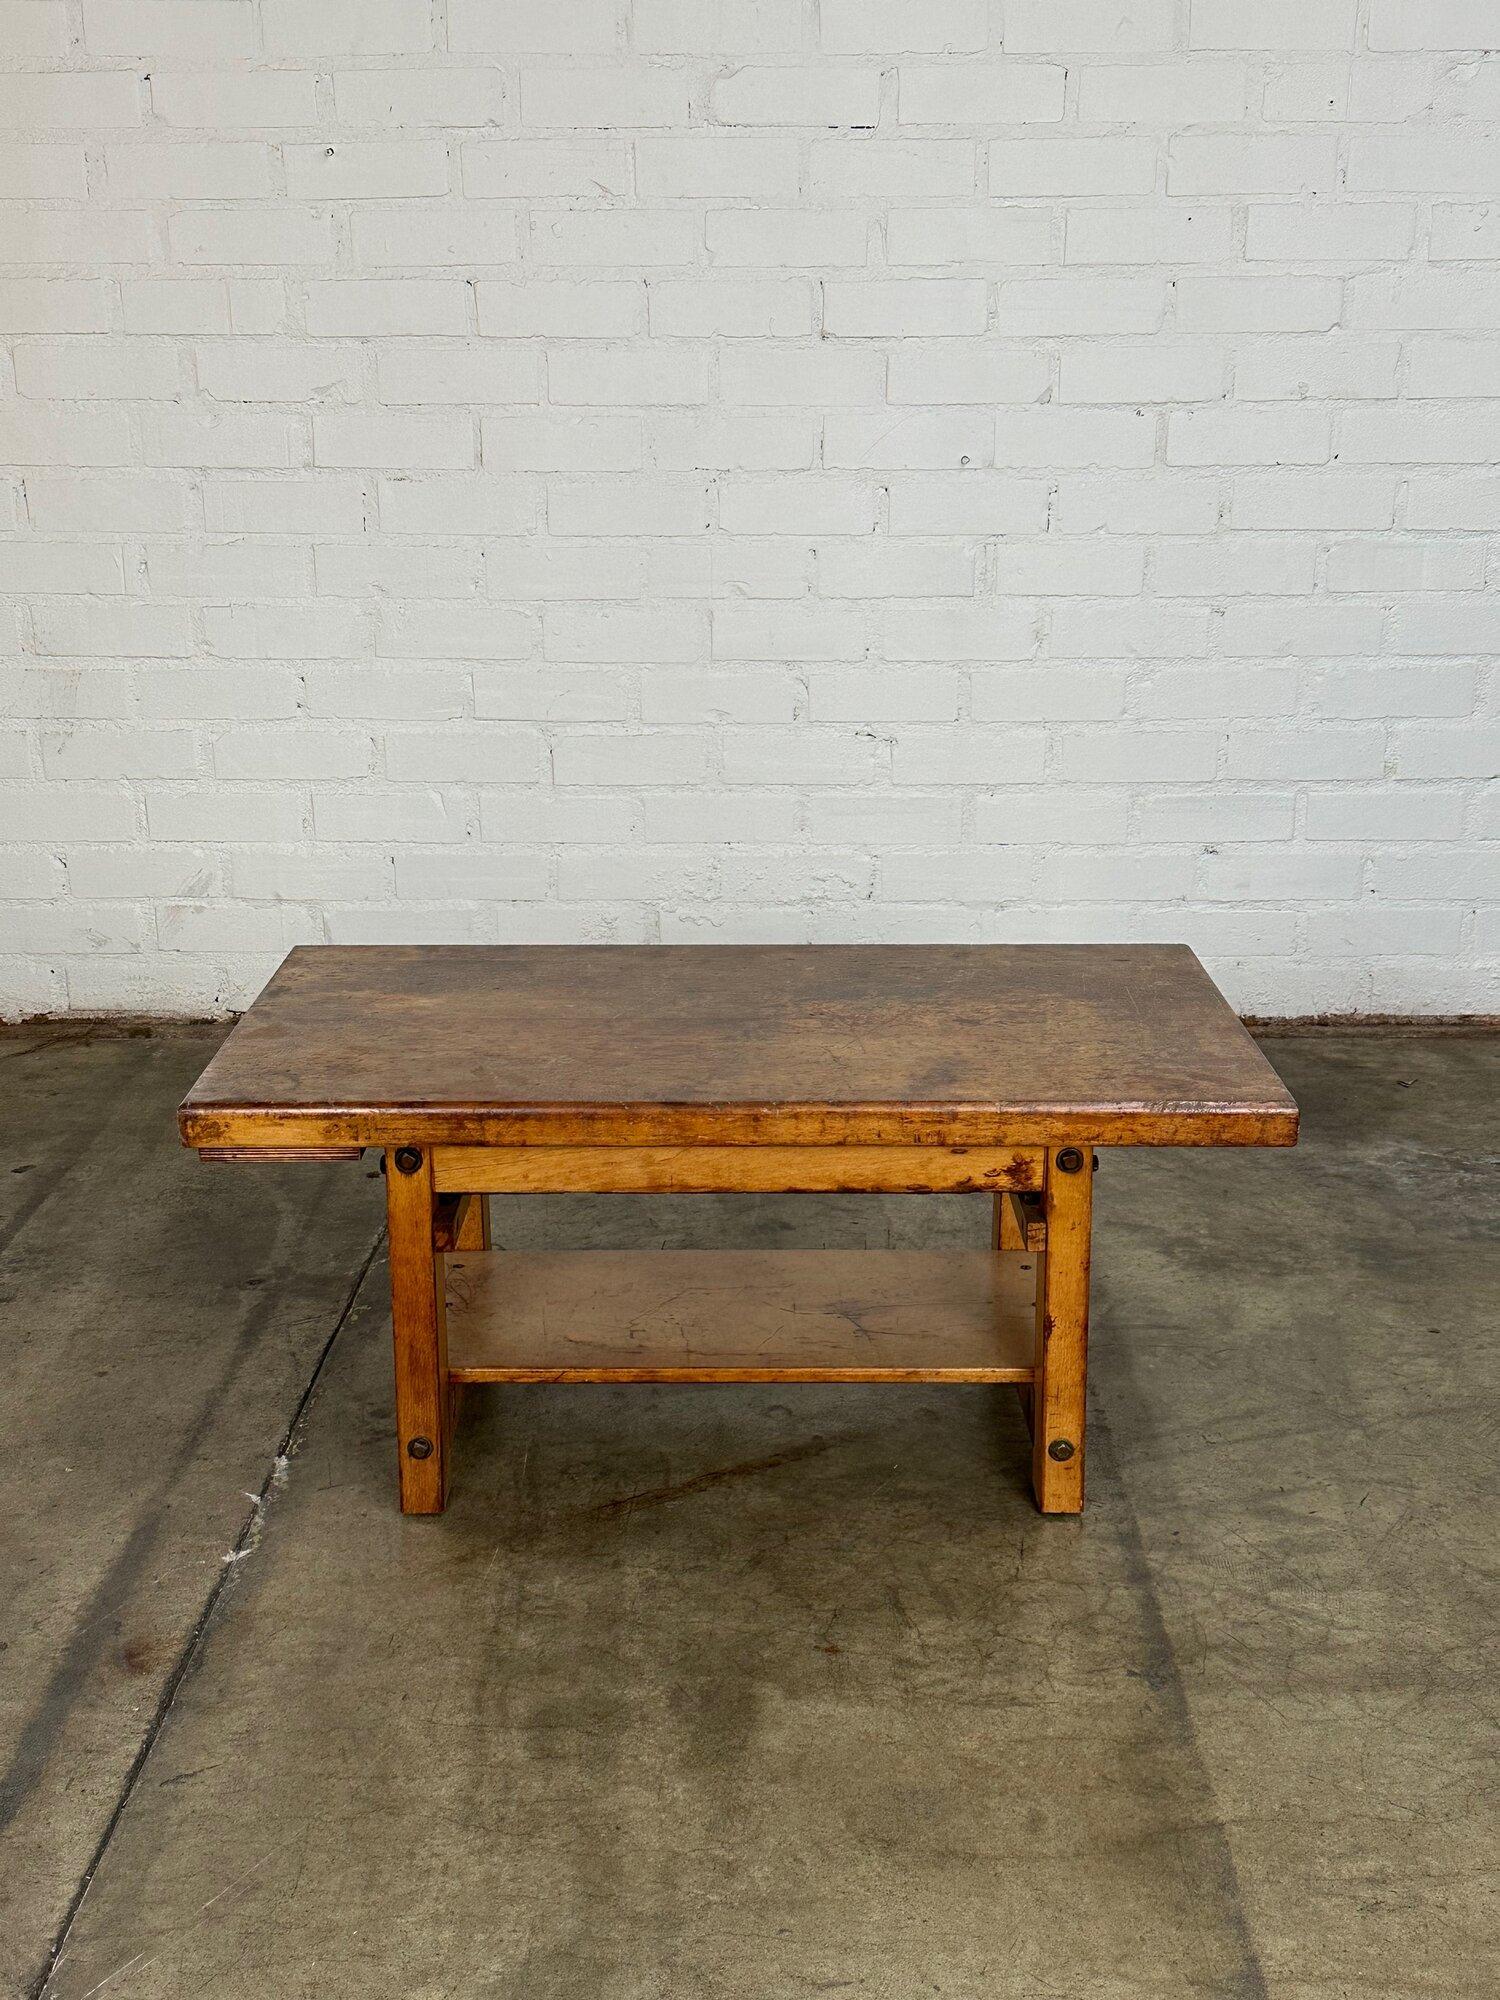 Rustic low profile work bench- reworked 9